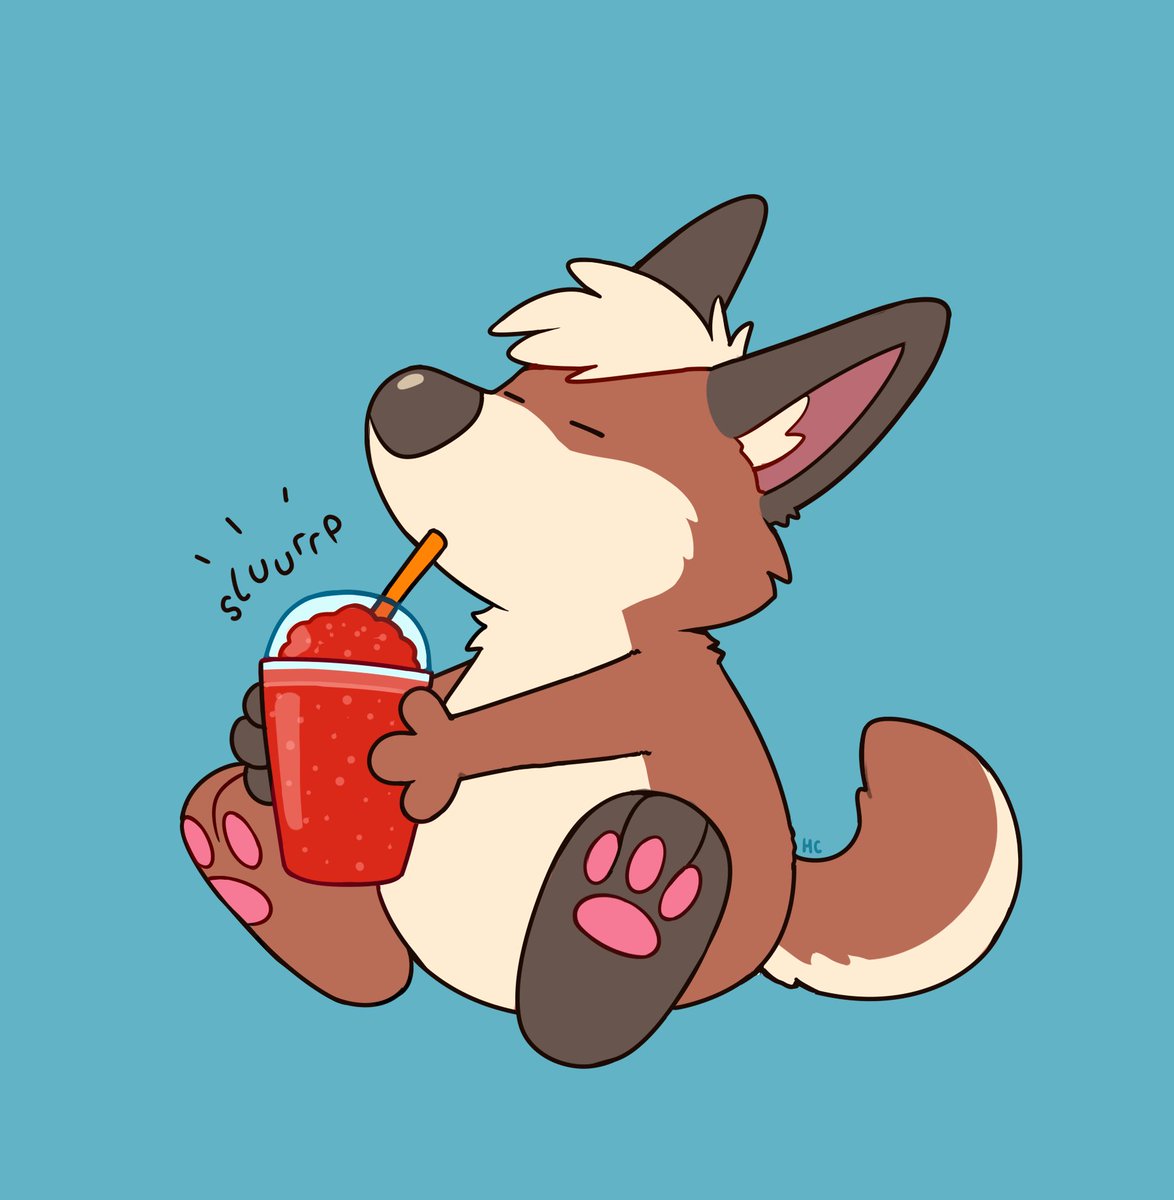 「I'm taking more slots for my slurp YCH! 」|Happycrumble ⭐のイラスト